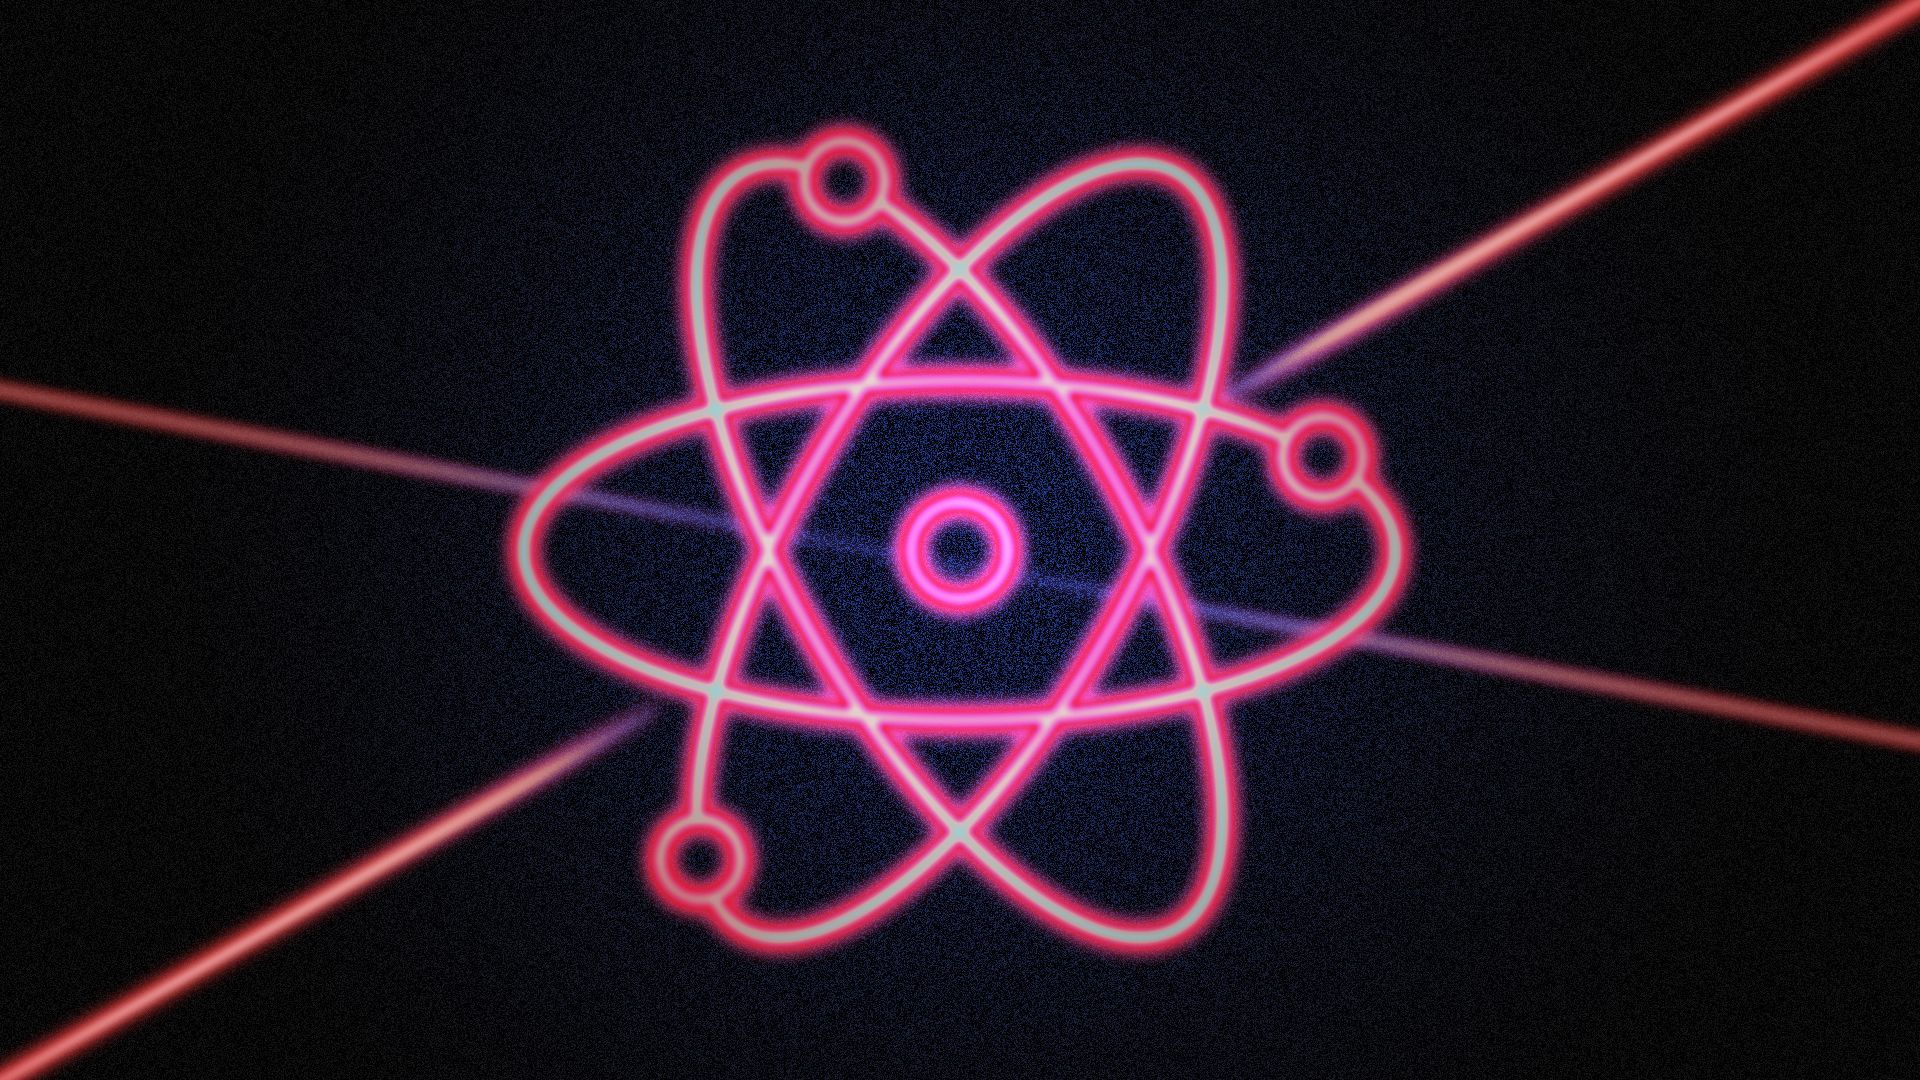 Illustration of an atom shape made by lasers